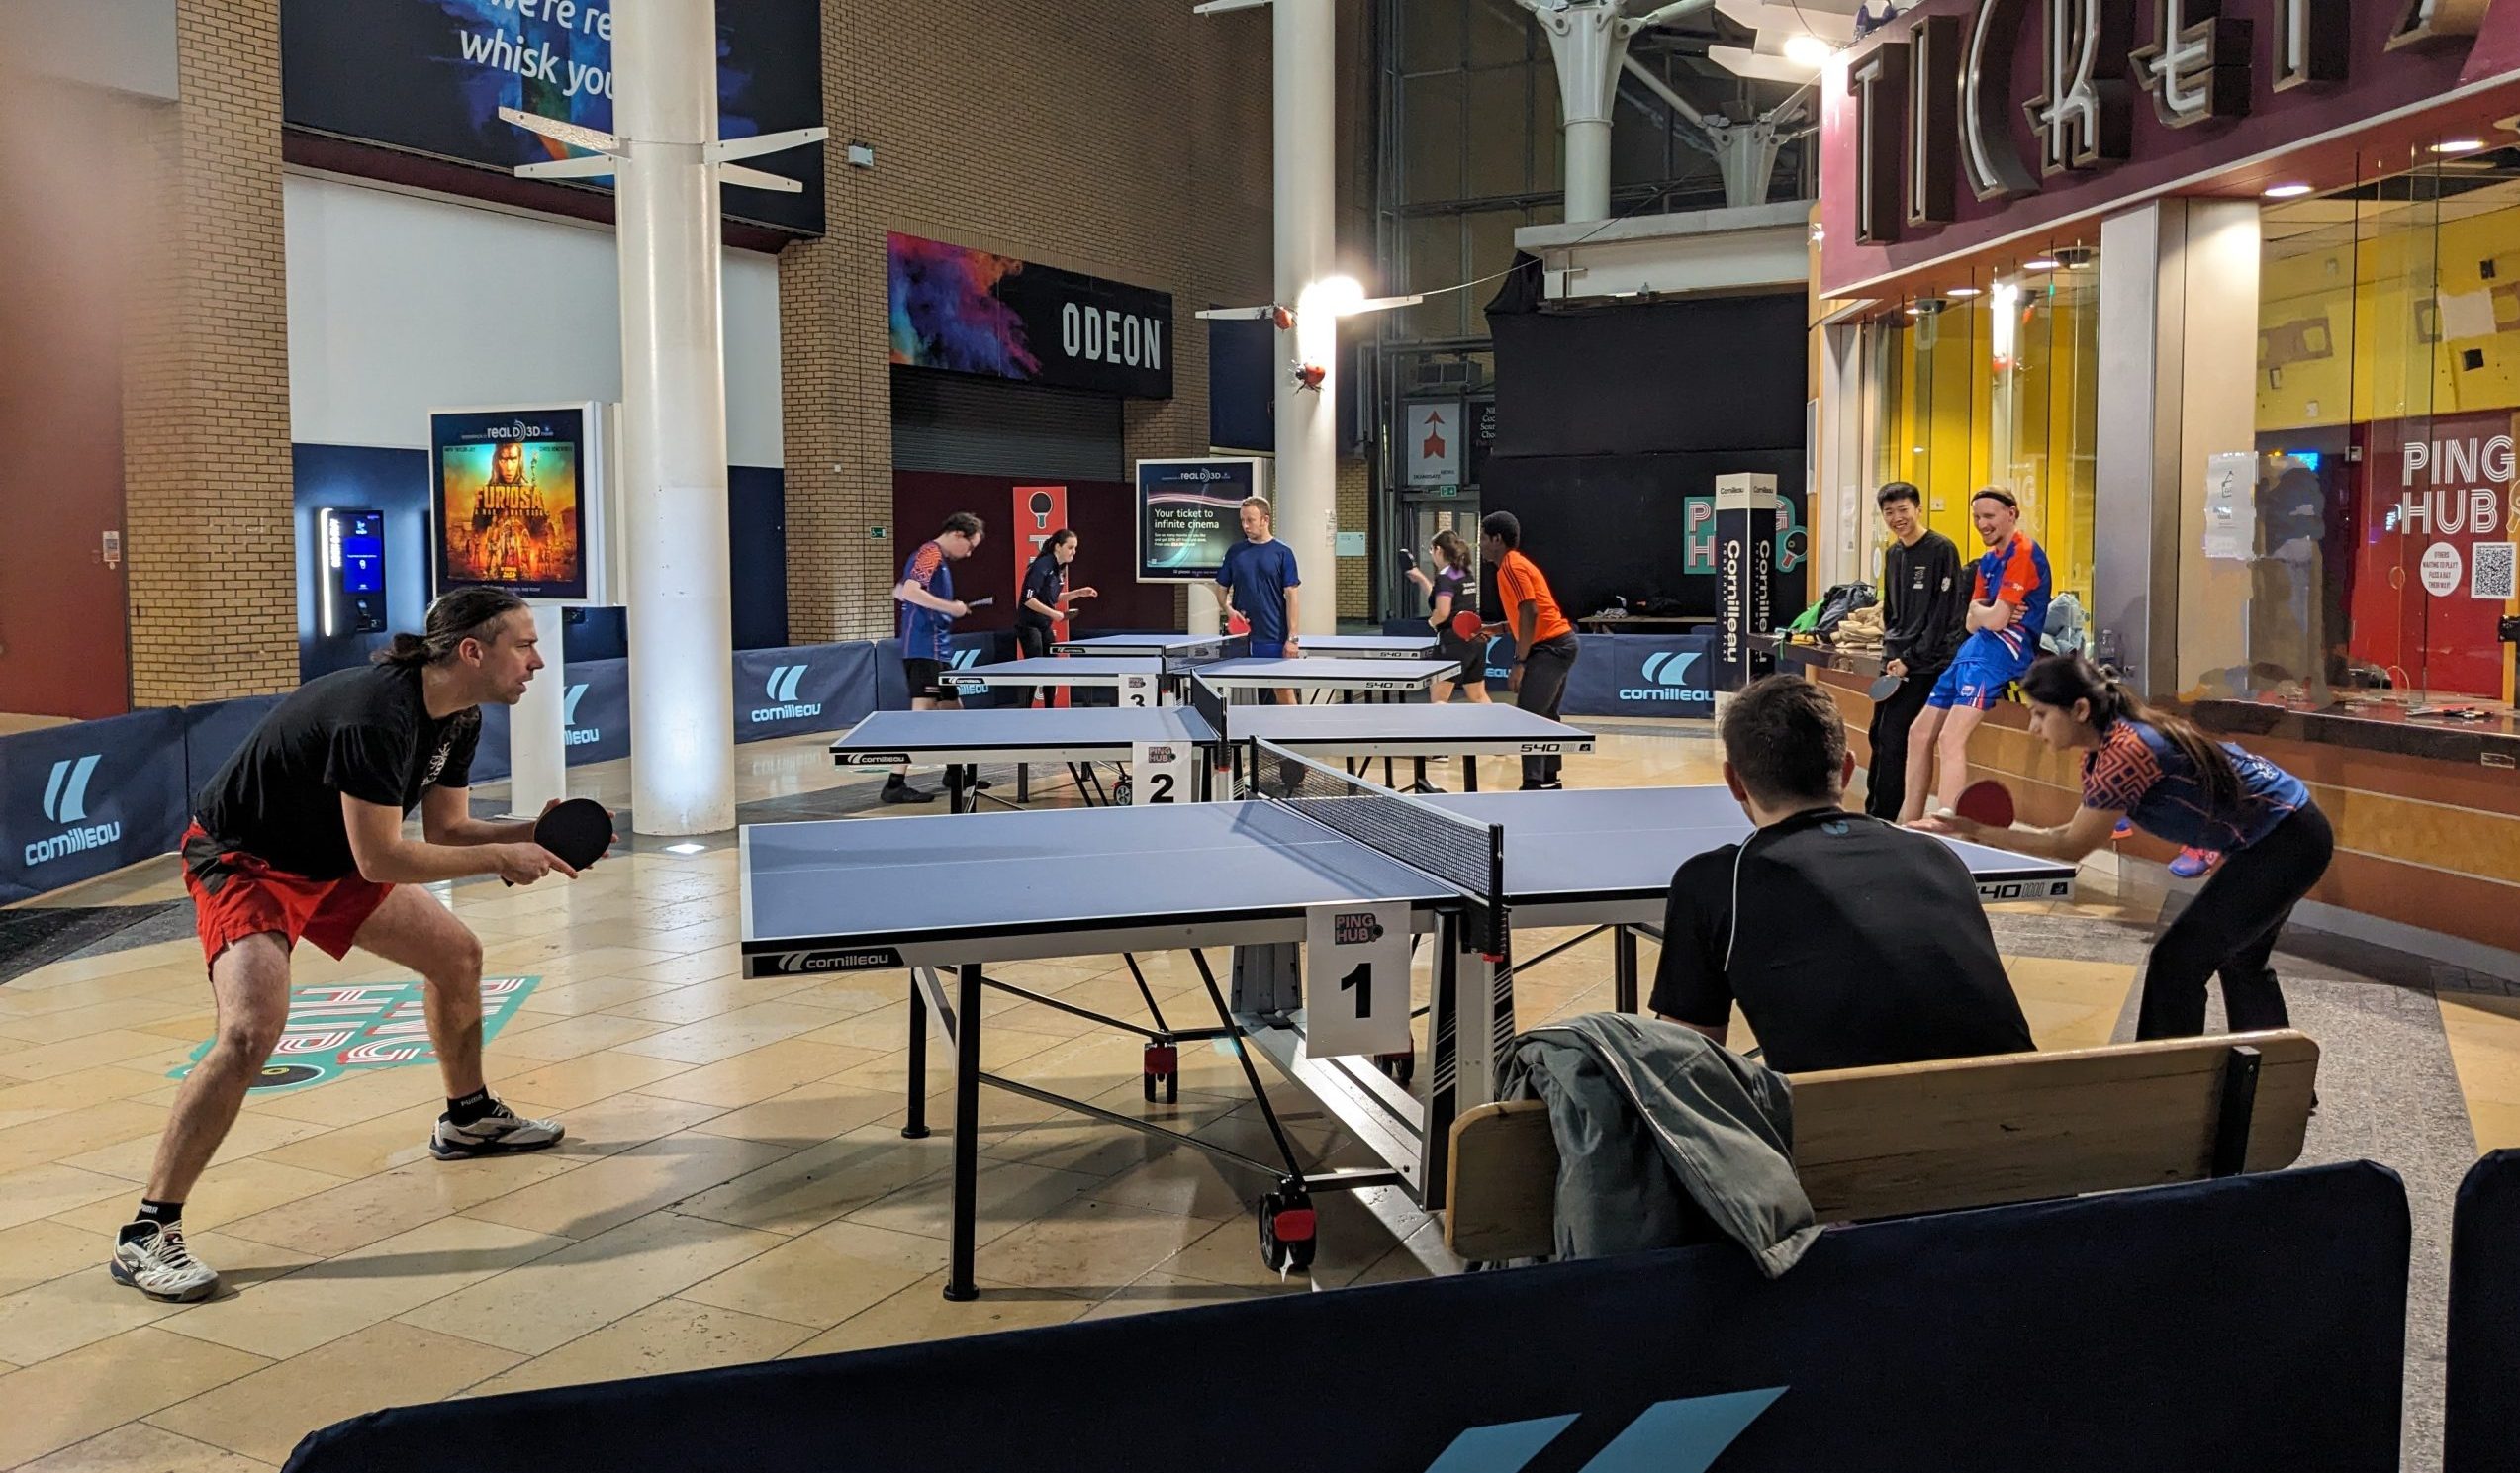 WTT event Feeds an upturn in participation in Manchester